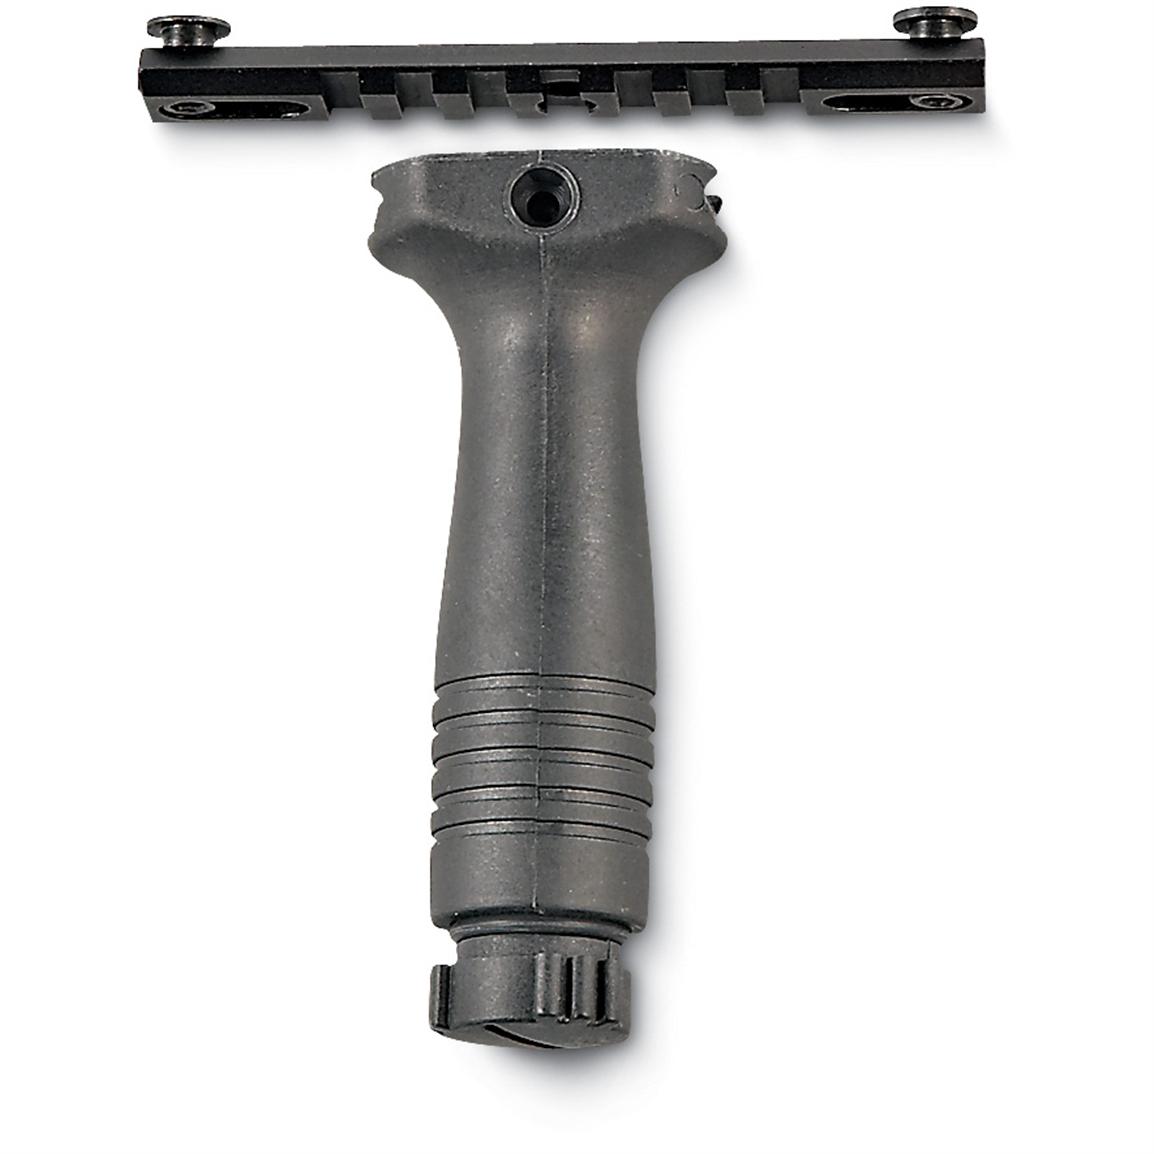 AR-15 Rail Accessories: Enhancing Your Shooting Experience - News Military